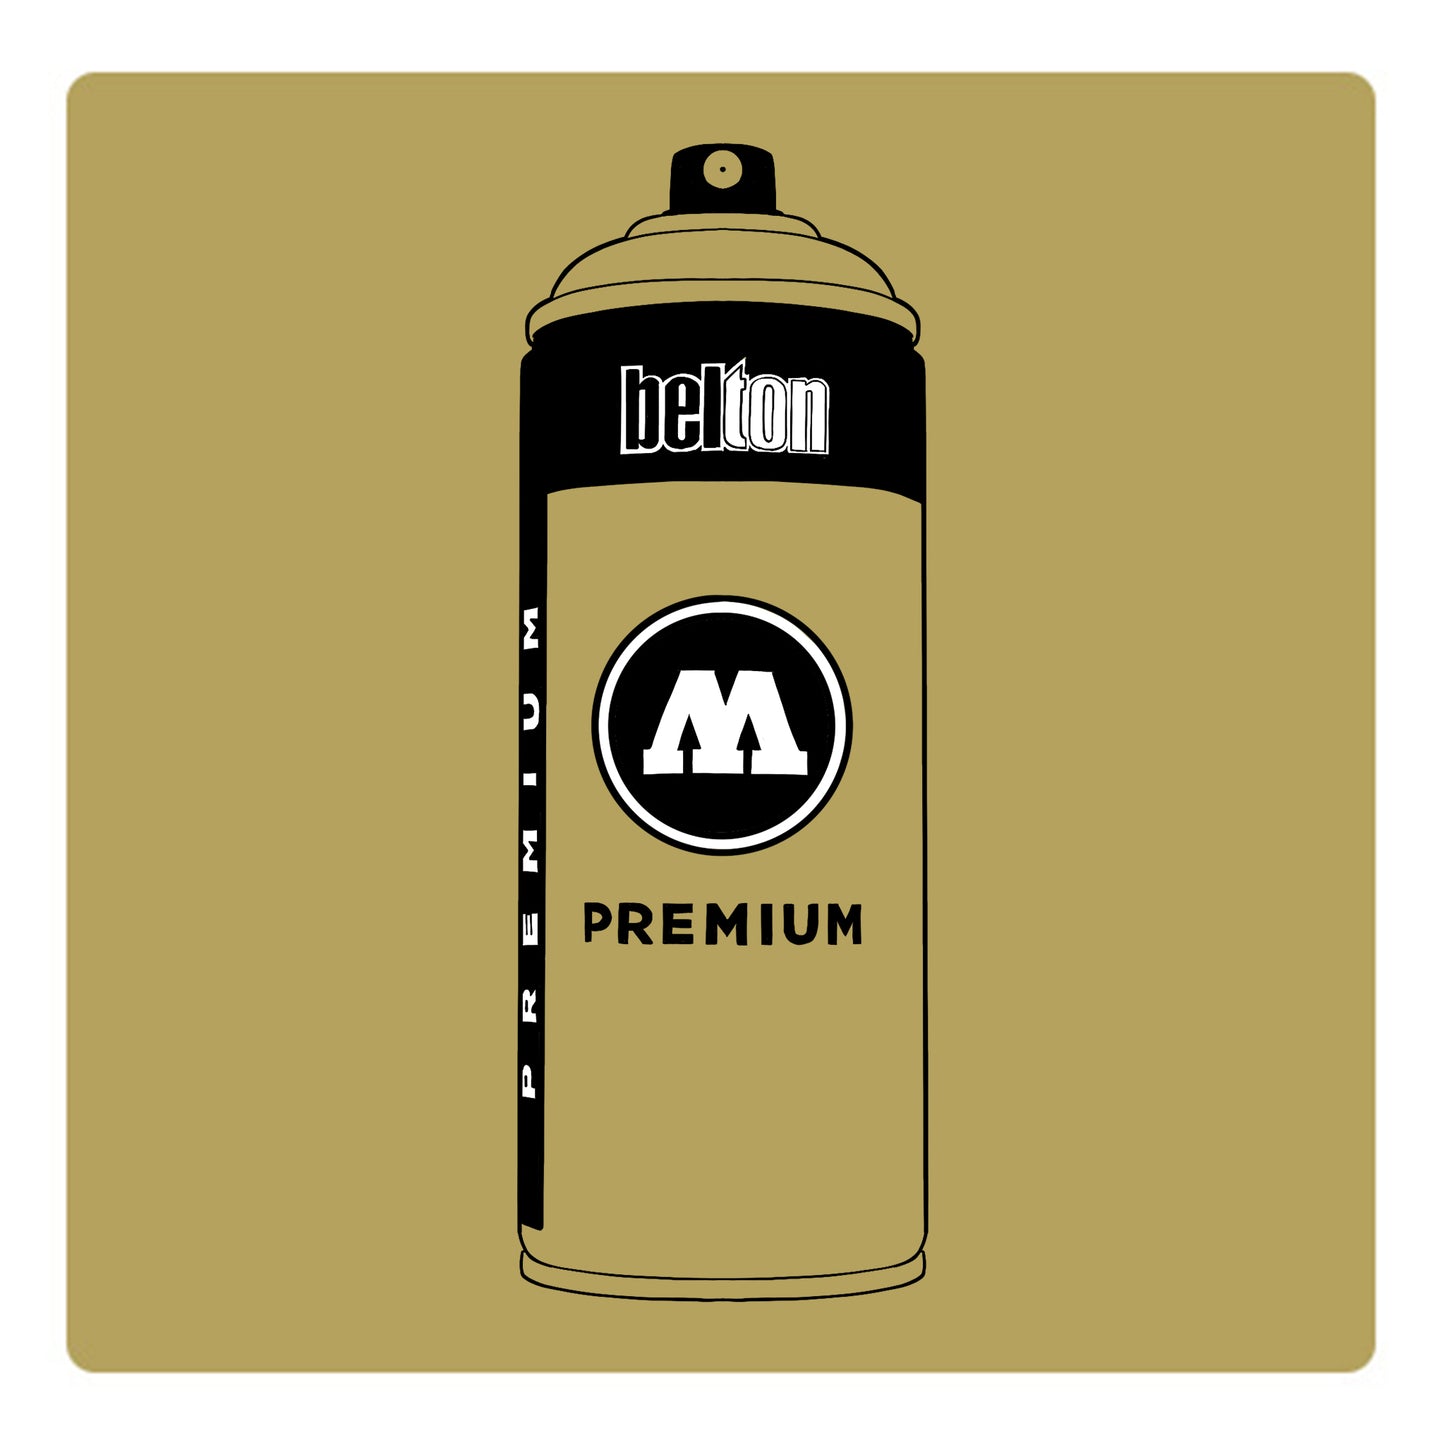 A black outline drawing of a light olive spray paint can with the words "belton","premium" and the letter"M" written on the face in black and white font. The background is a color swatch of the same light olive with a white border